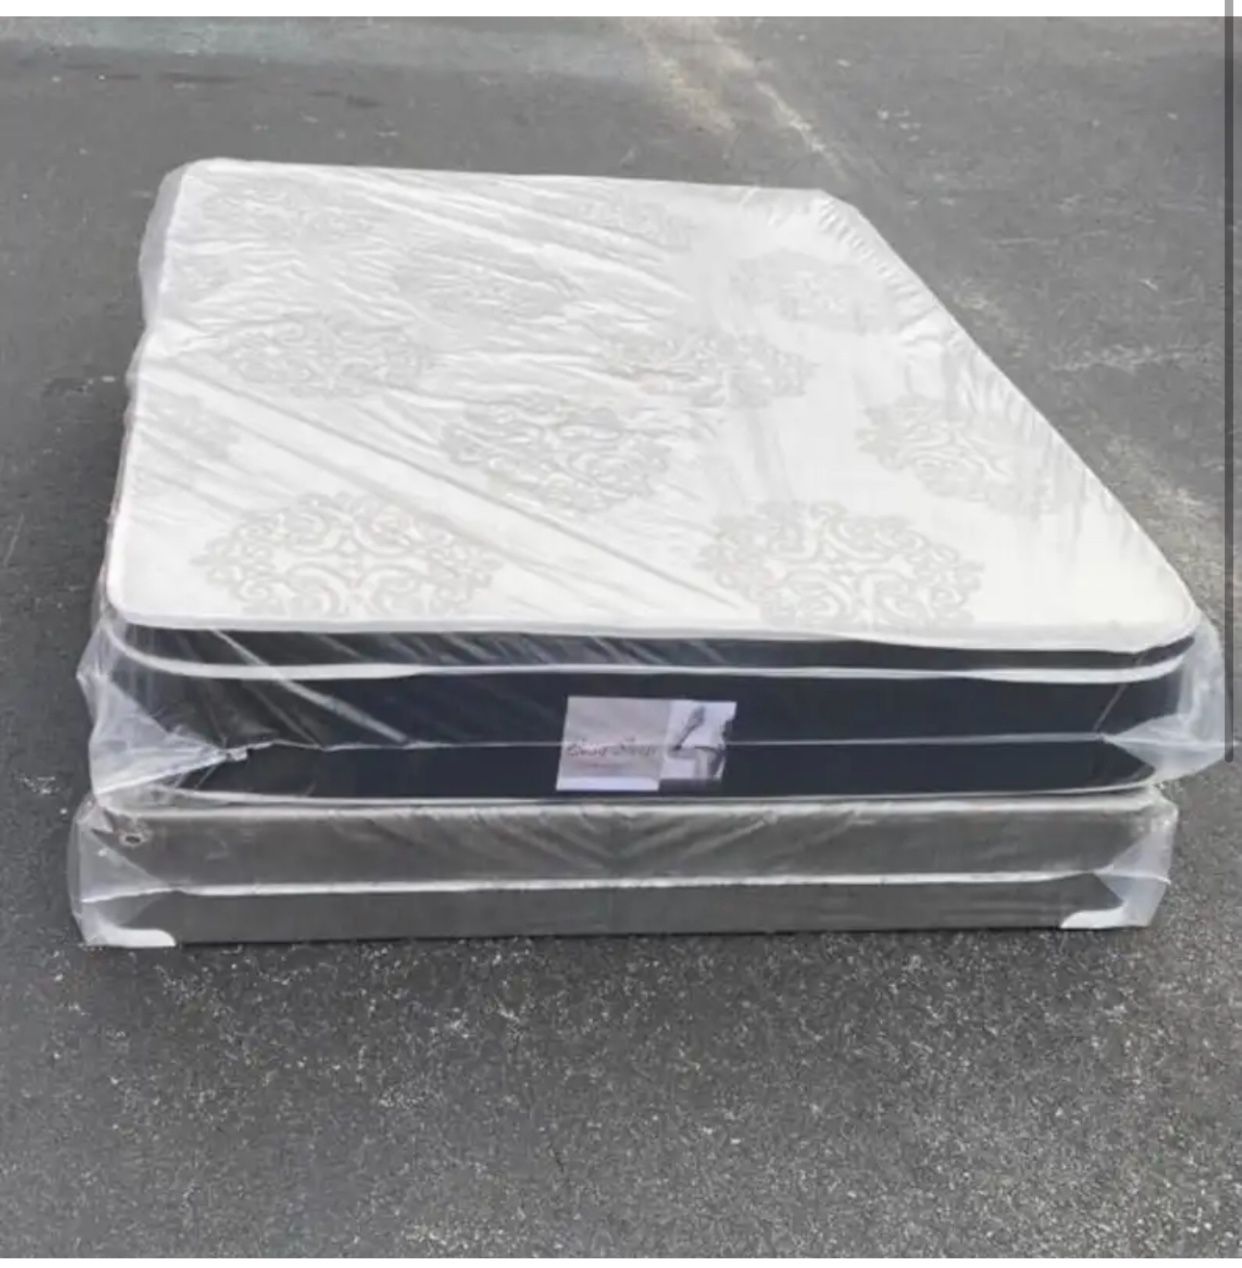 Mattress Queen Size Pillowtop and Box Spring // Delivery Available 🚛